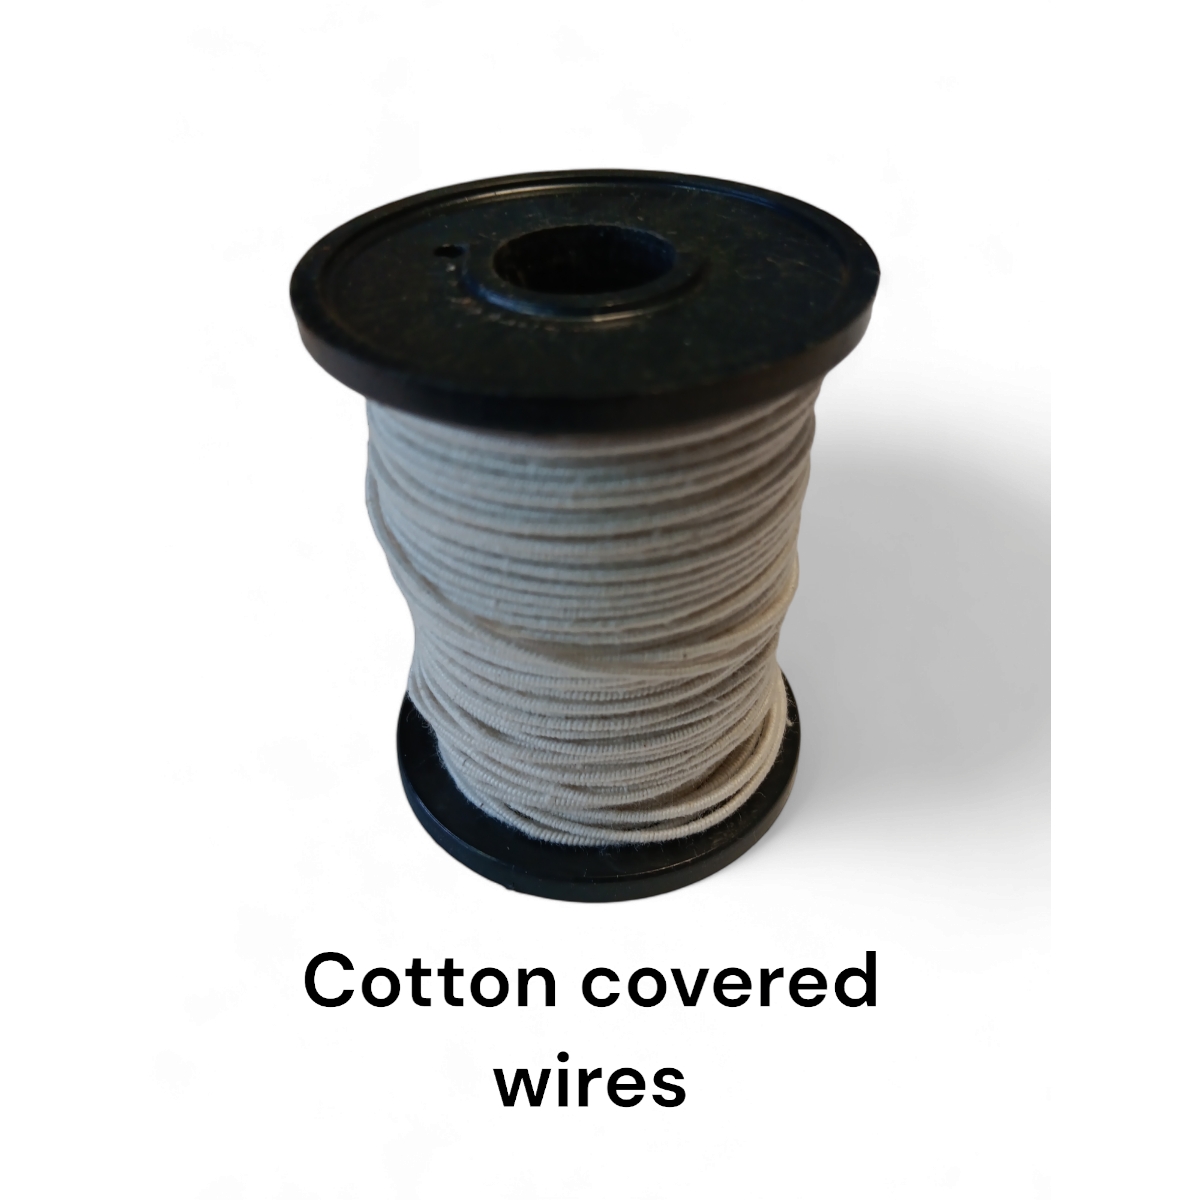 COTTON COVERED WIRES